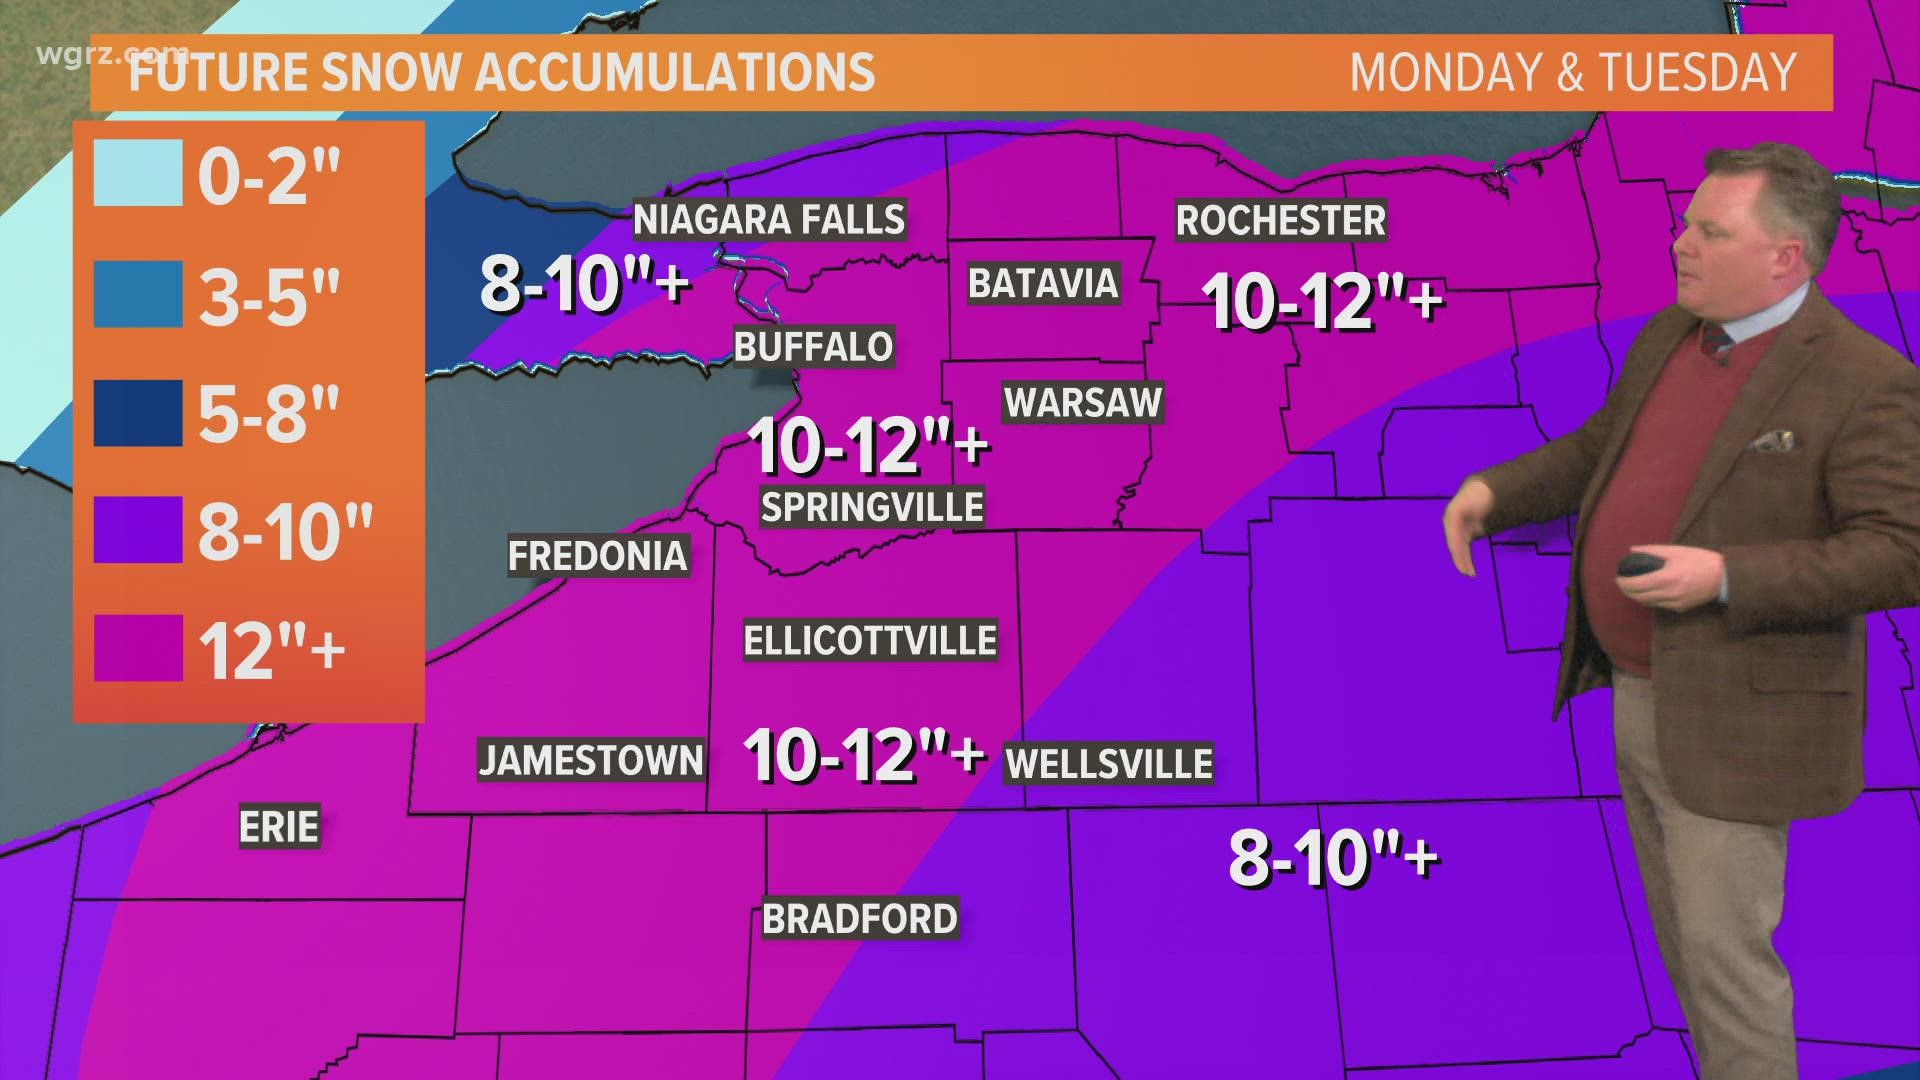 Patrick has possible snowfall for WNY for Sunday into Monday snow storm